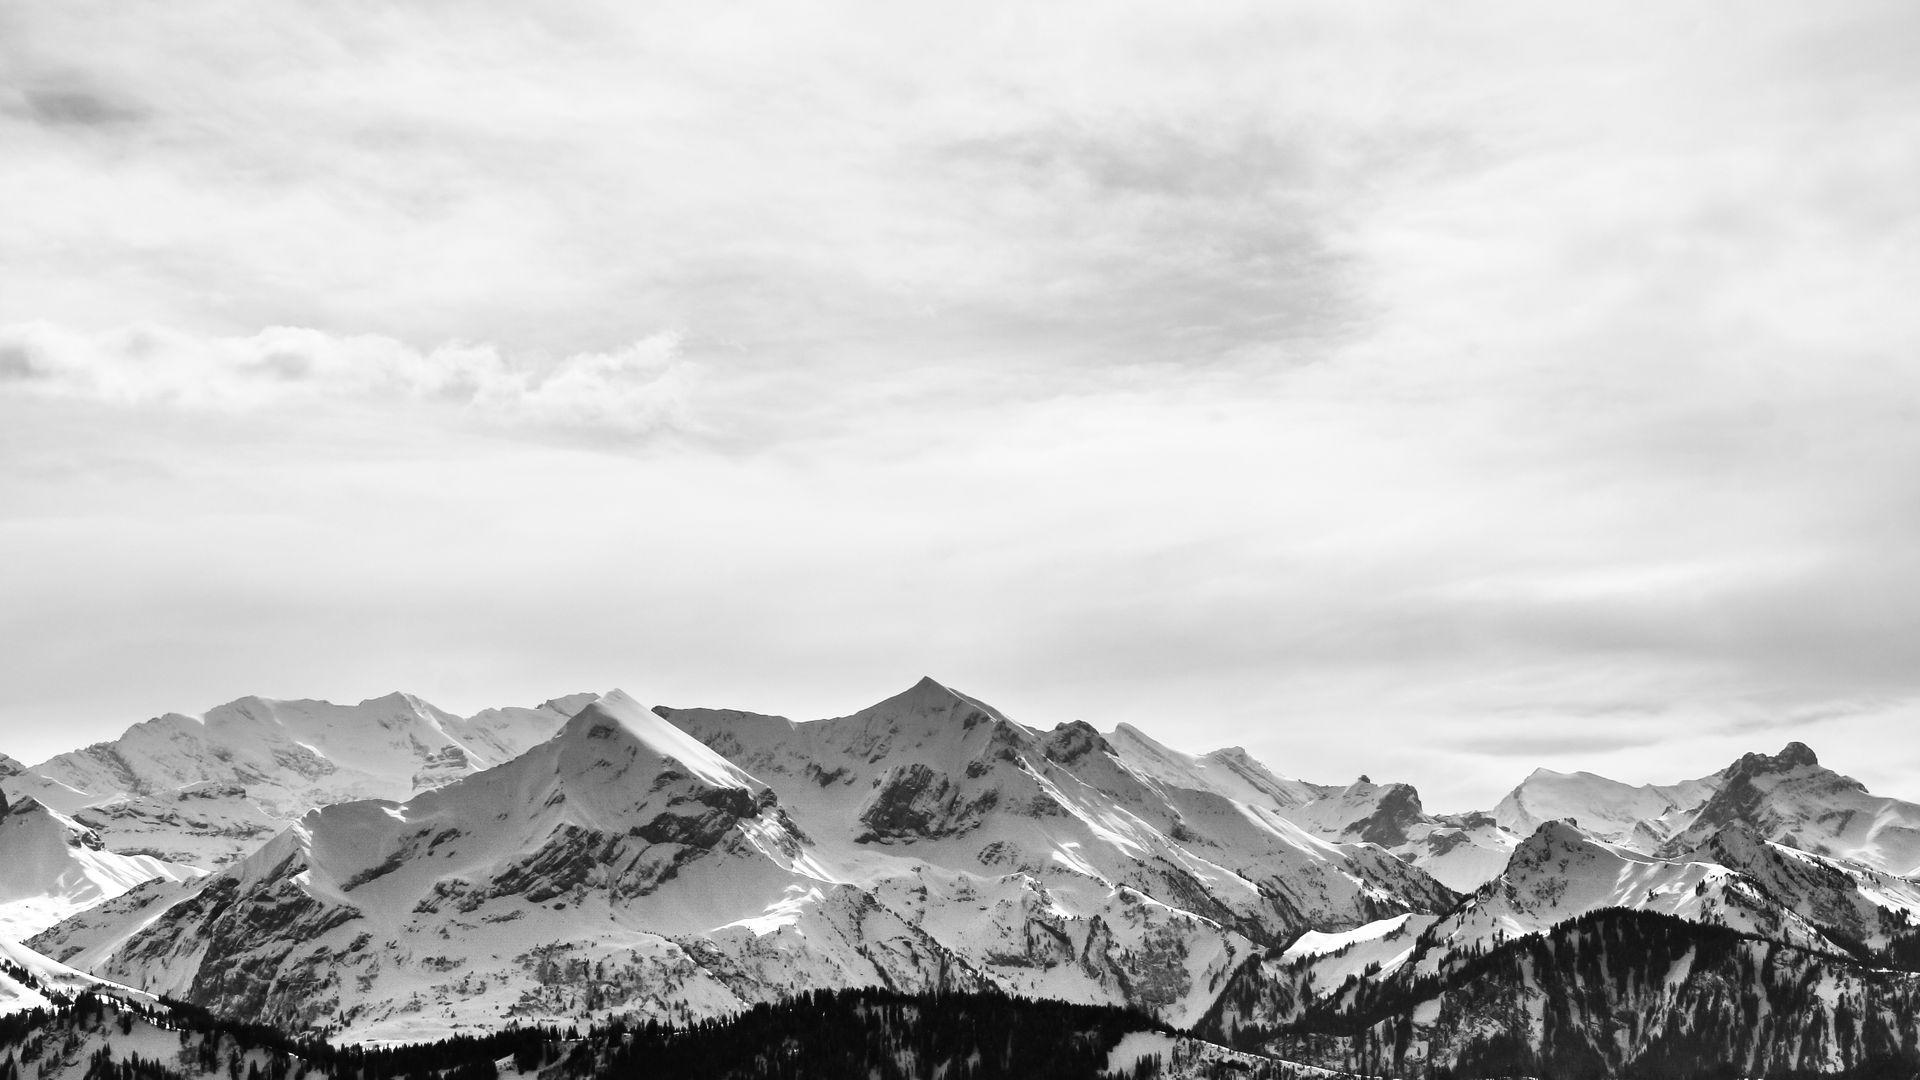 Black and White Mountain Wallpapers - Top Free Black and White Mountain